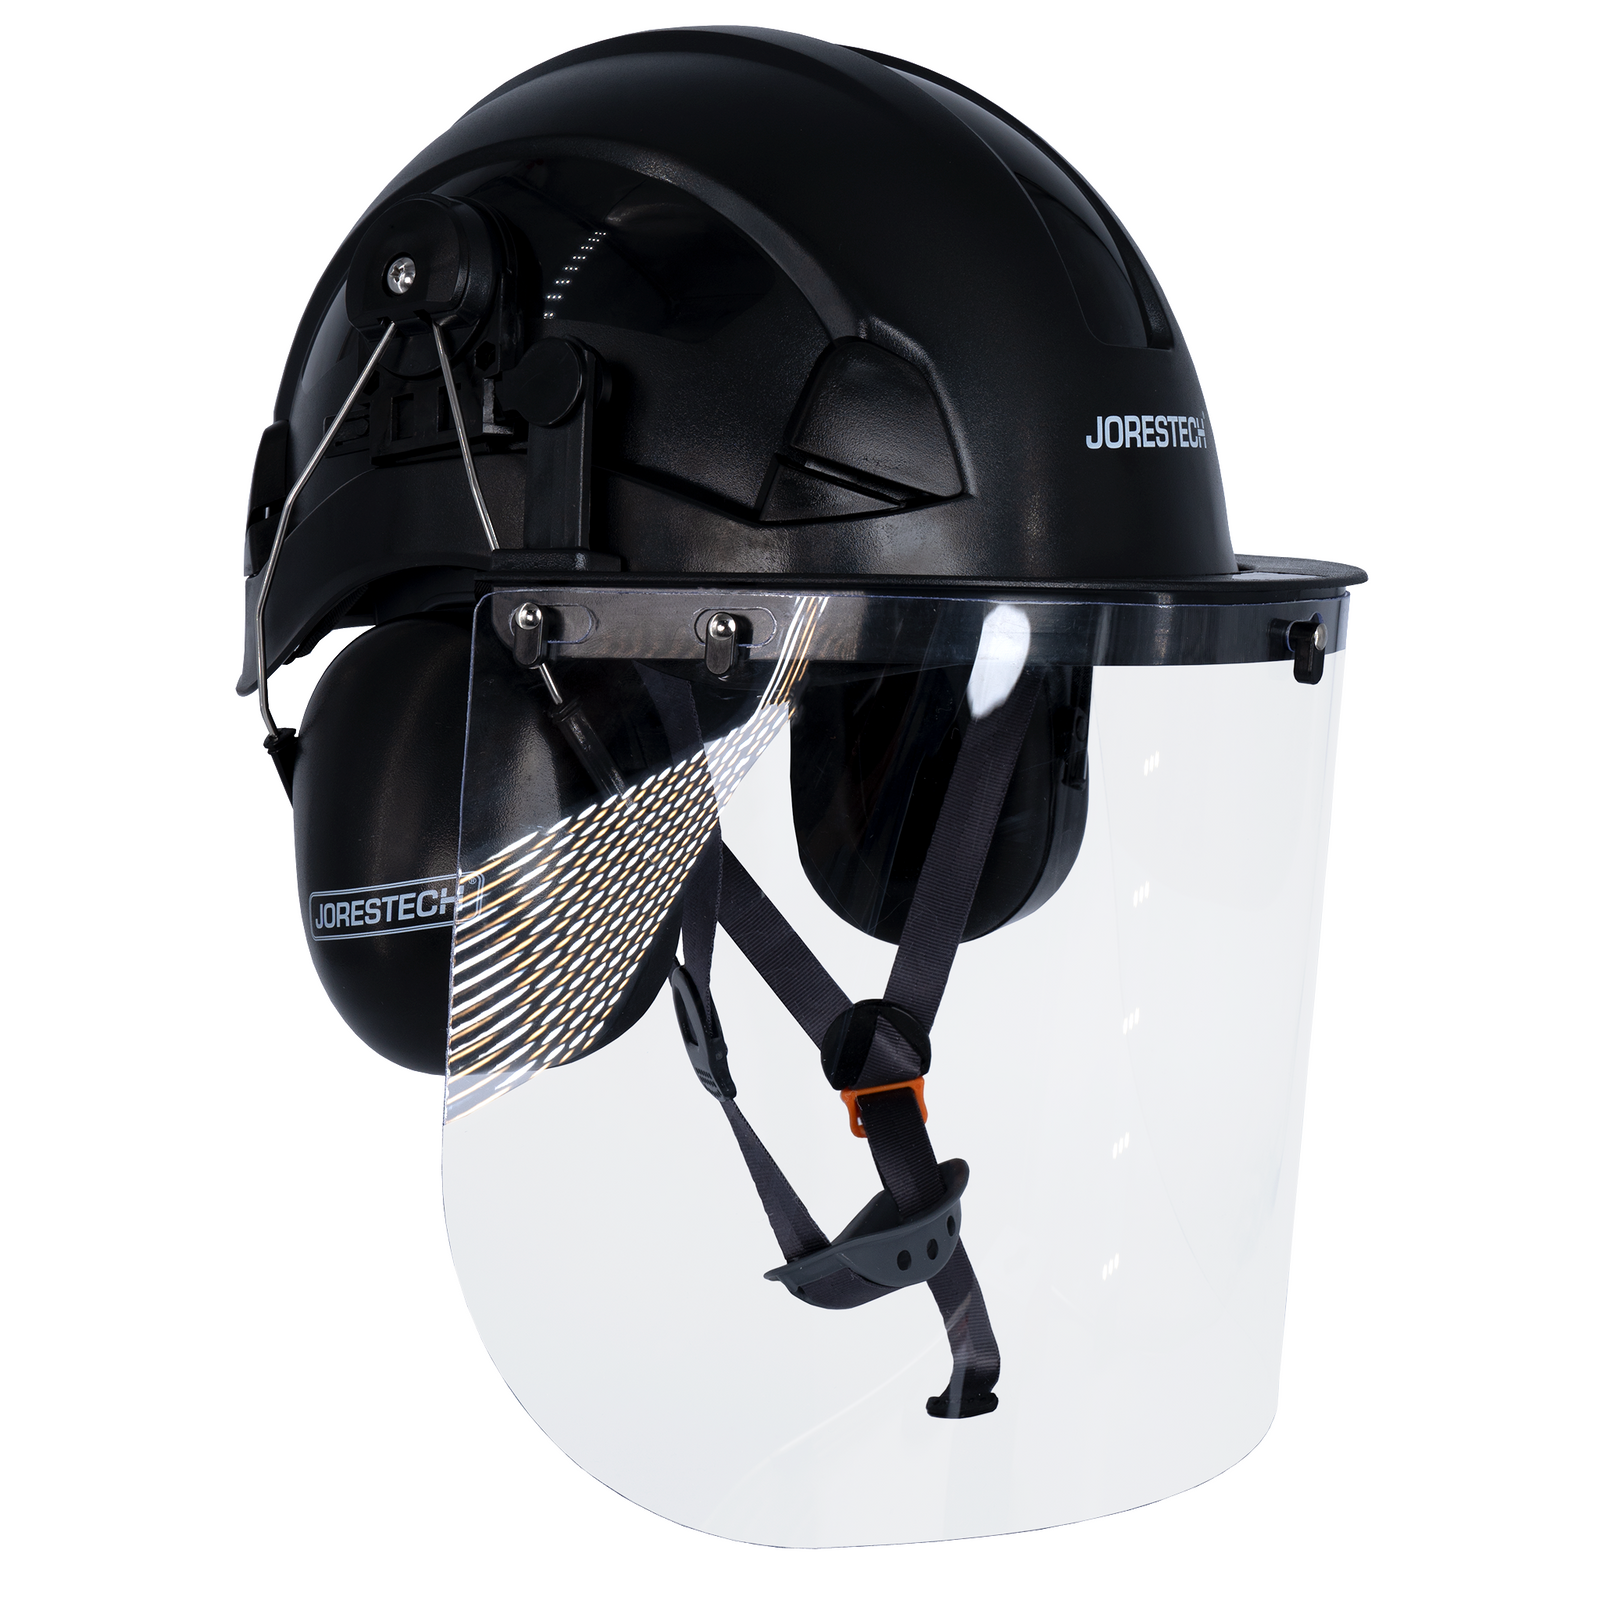 Side view of the Jorestech black 3-in-1 helmet system with mountable face shield and earmuffs